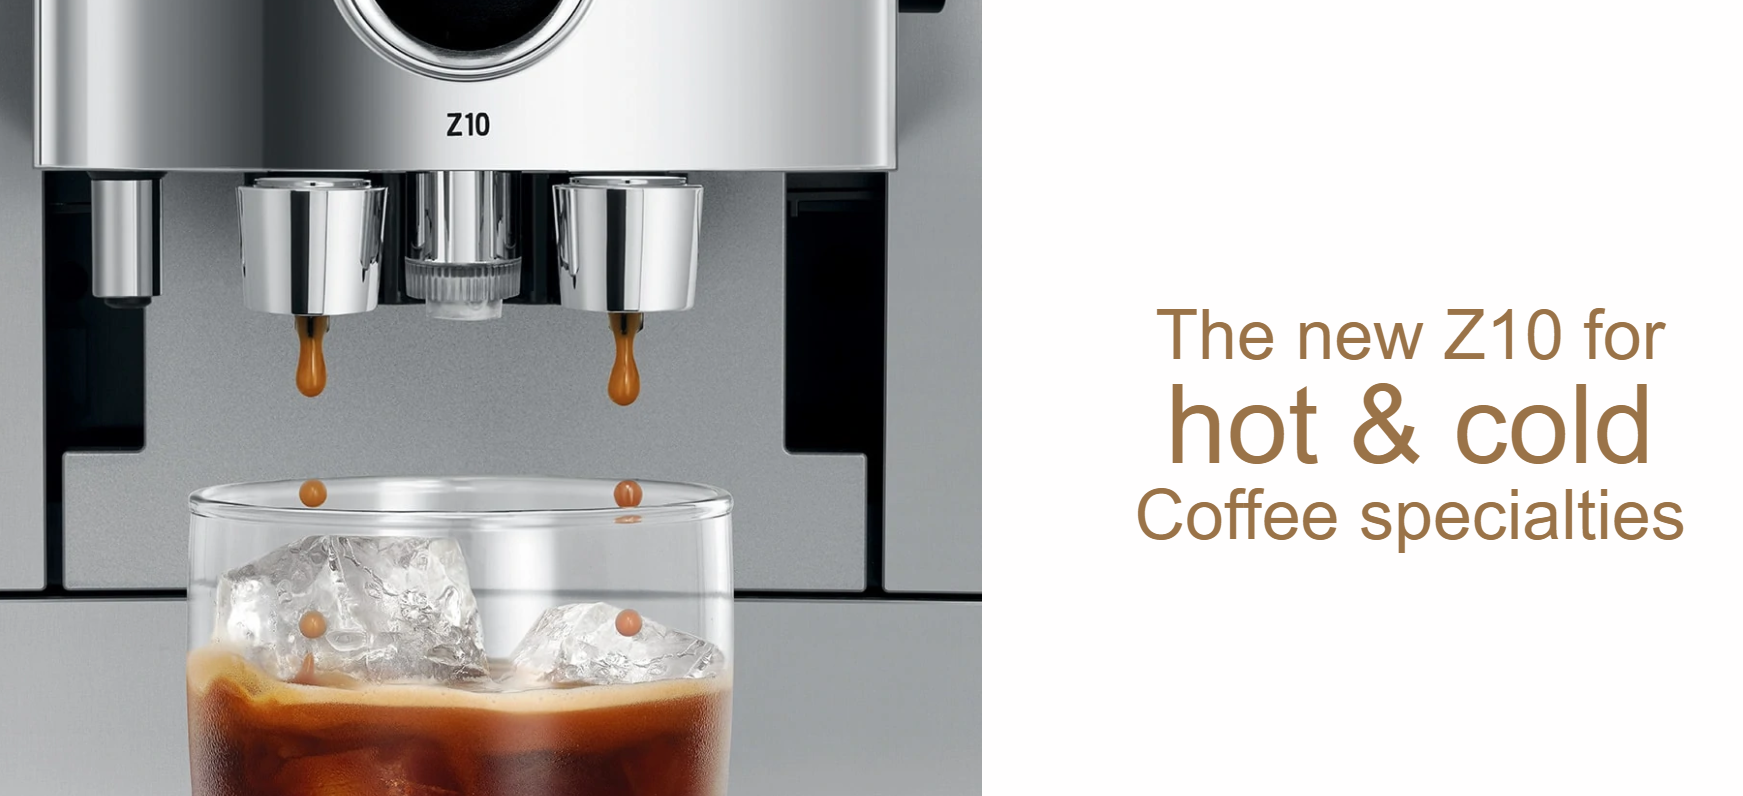 The Jura Z10 Review - Making all 32 Beverages with the Jura Z10 Espresso Machine